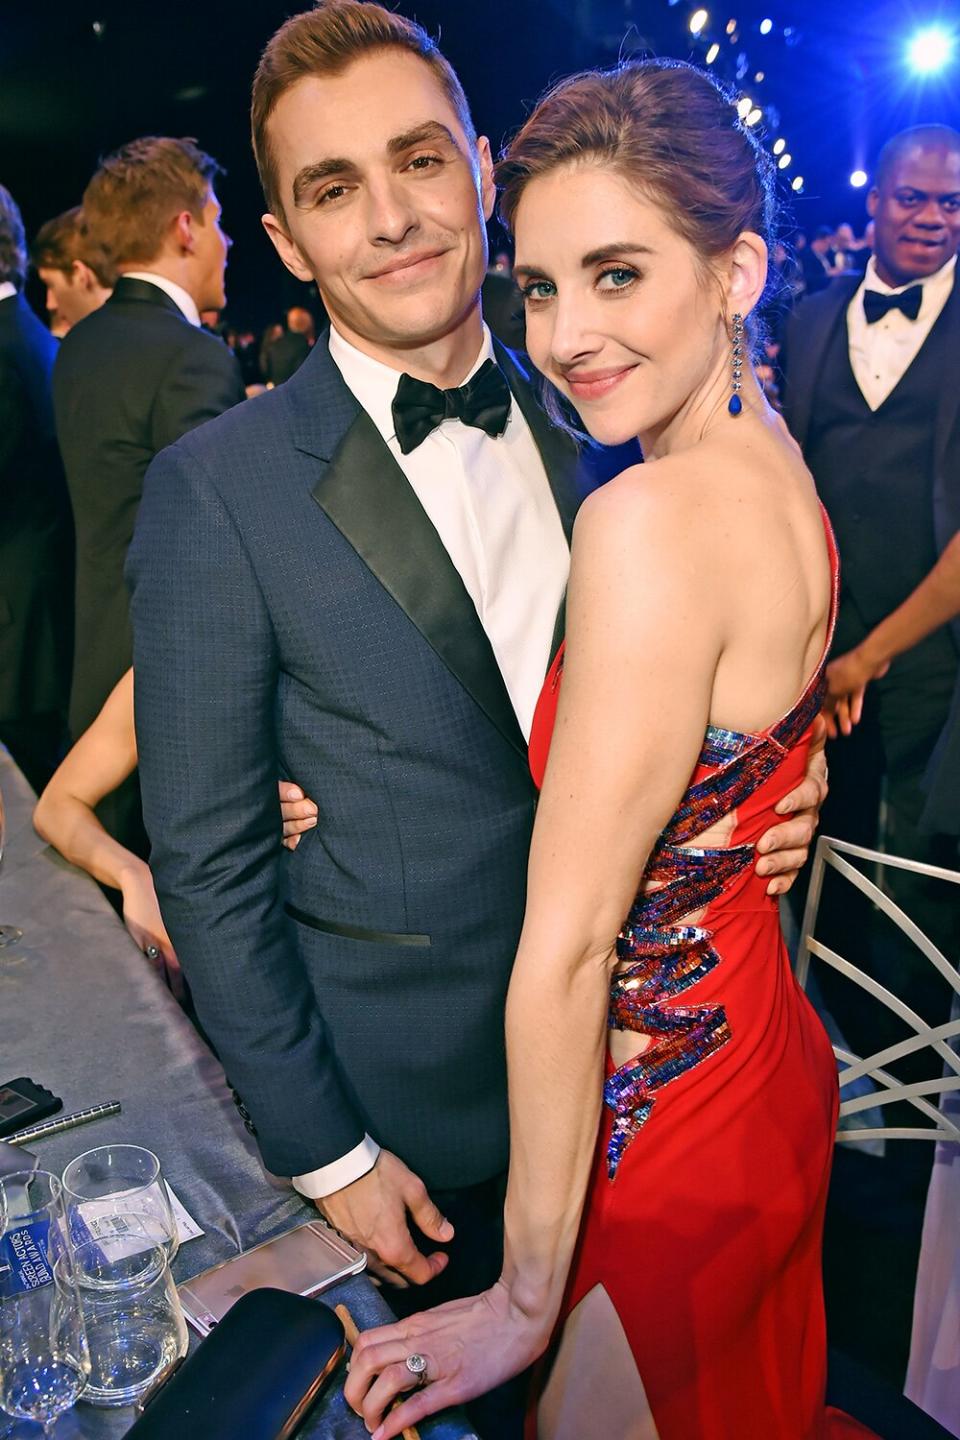 LOS ANGELES, CA - JANUARY 21: Actors Dave Franco (L) and Alison Brie pose during the 24th Annual Screen Actors Guild Awards at The Shrine Auditorium on January 21, 2018 in Los Angeles, California. 27522_007 (Photo by Kevin Mazur/Getty Images for Turner)